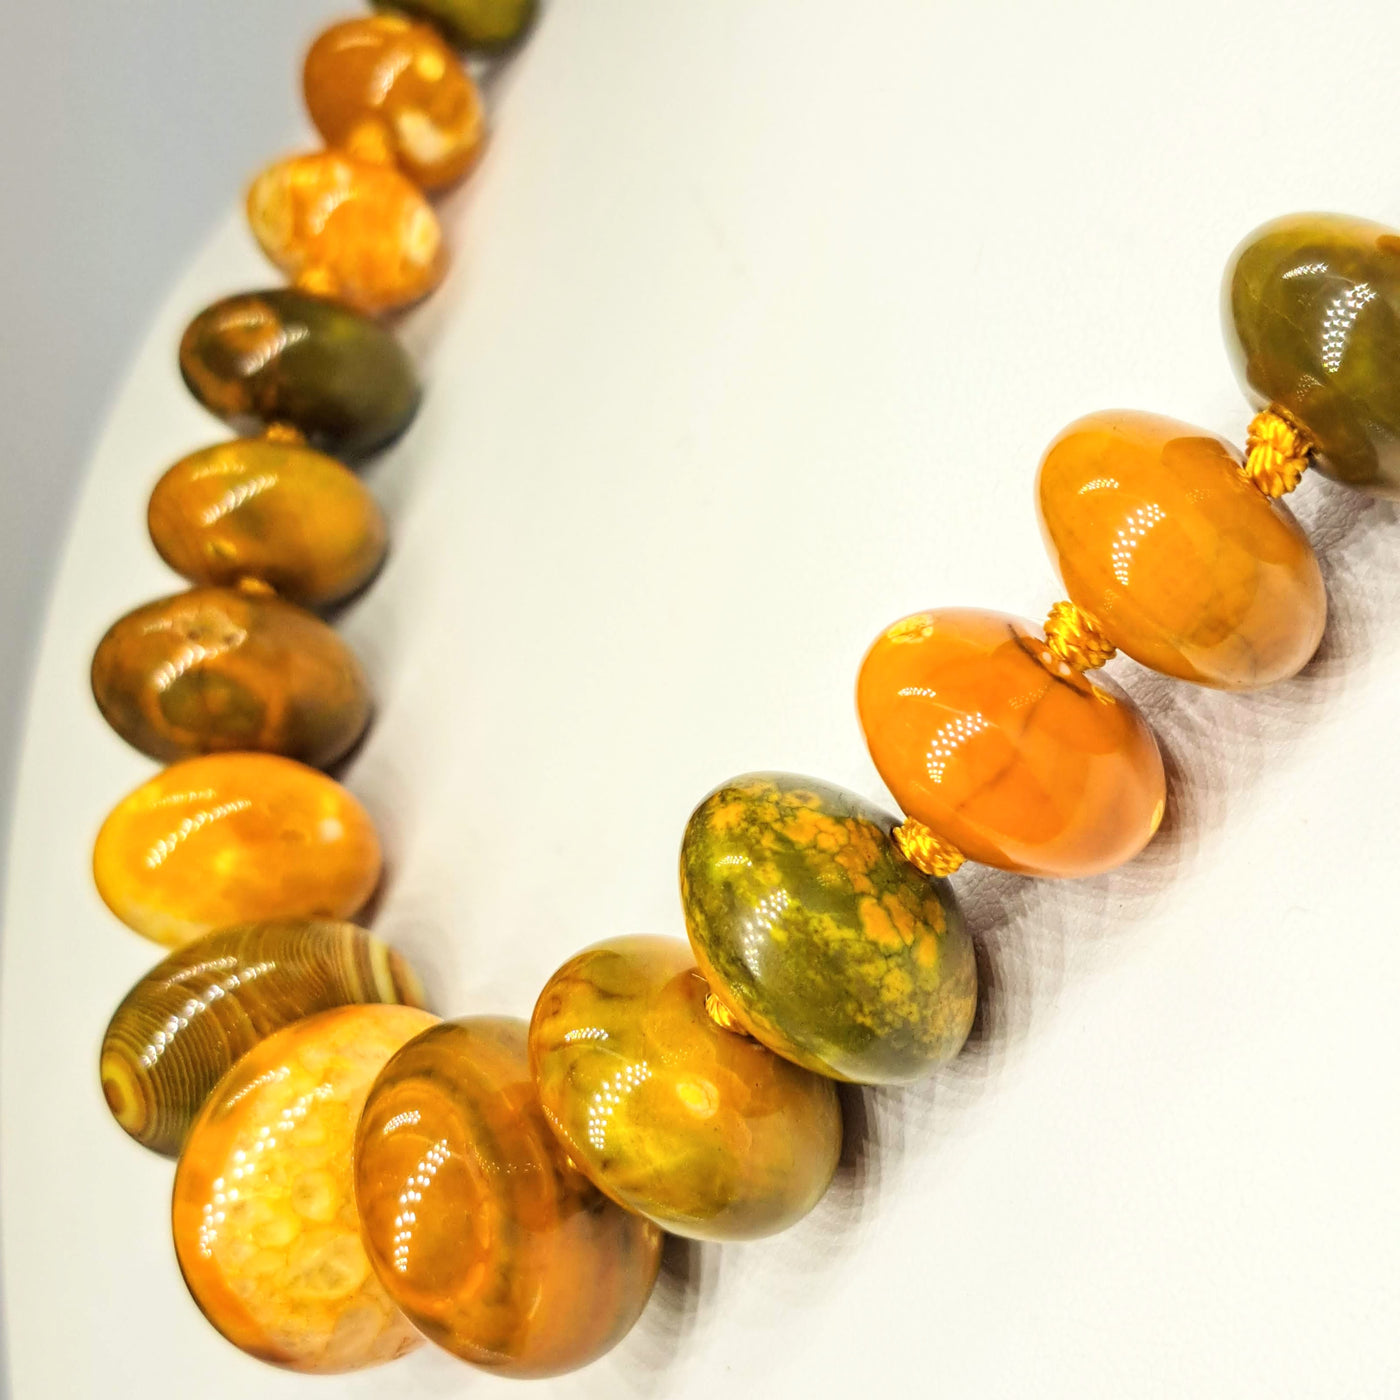 "Pumpkin Spice" 16" to 18" Necklace - Banded Agate, Sterling